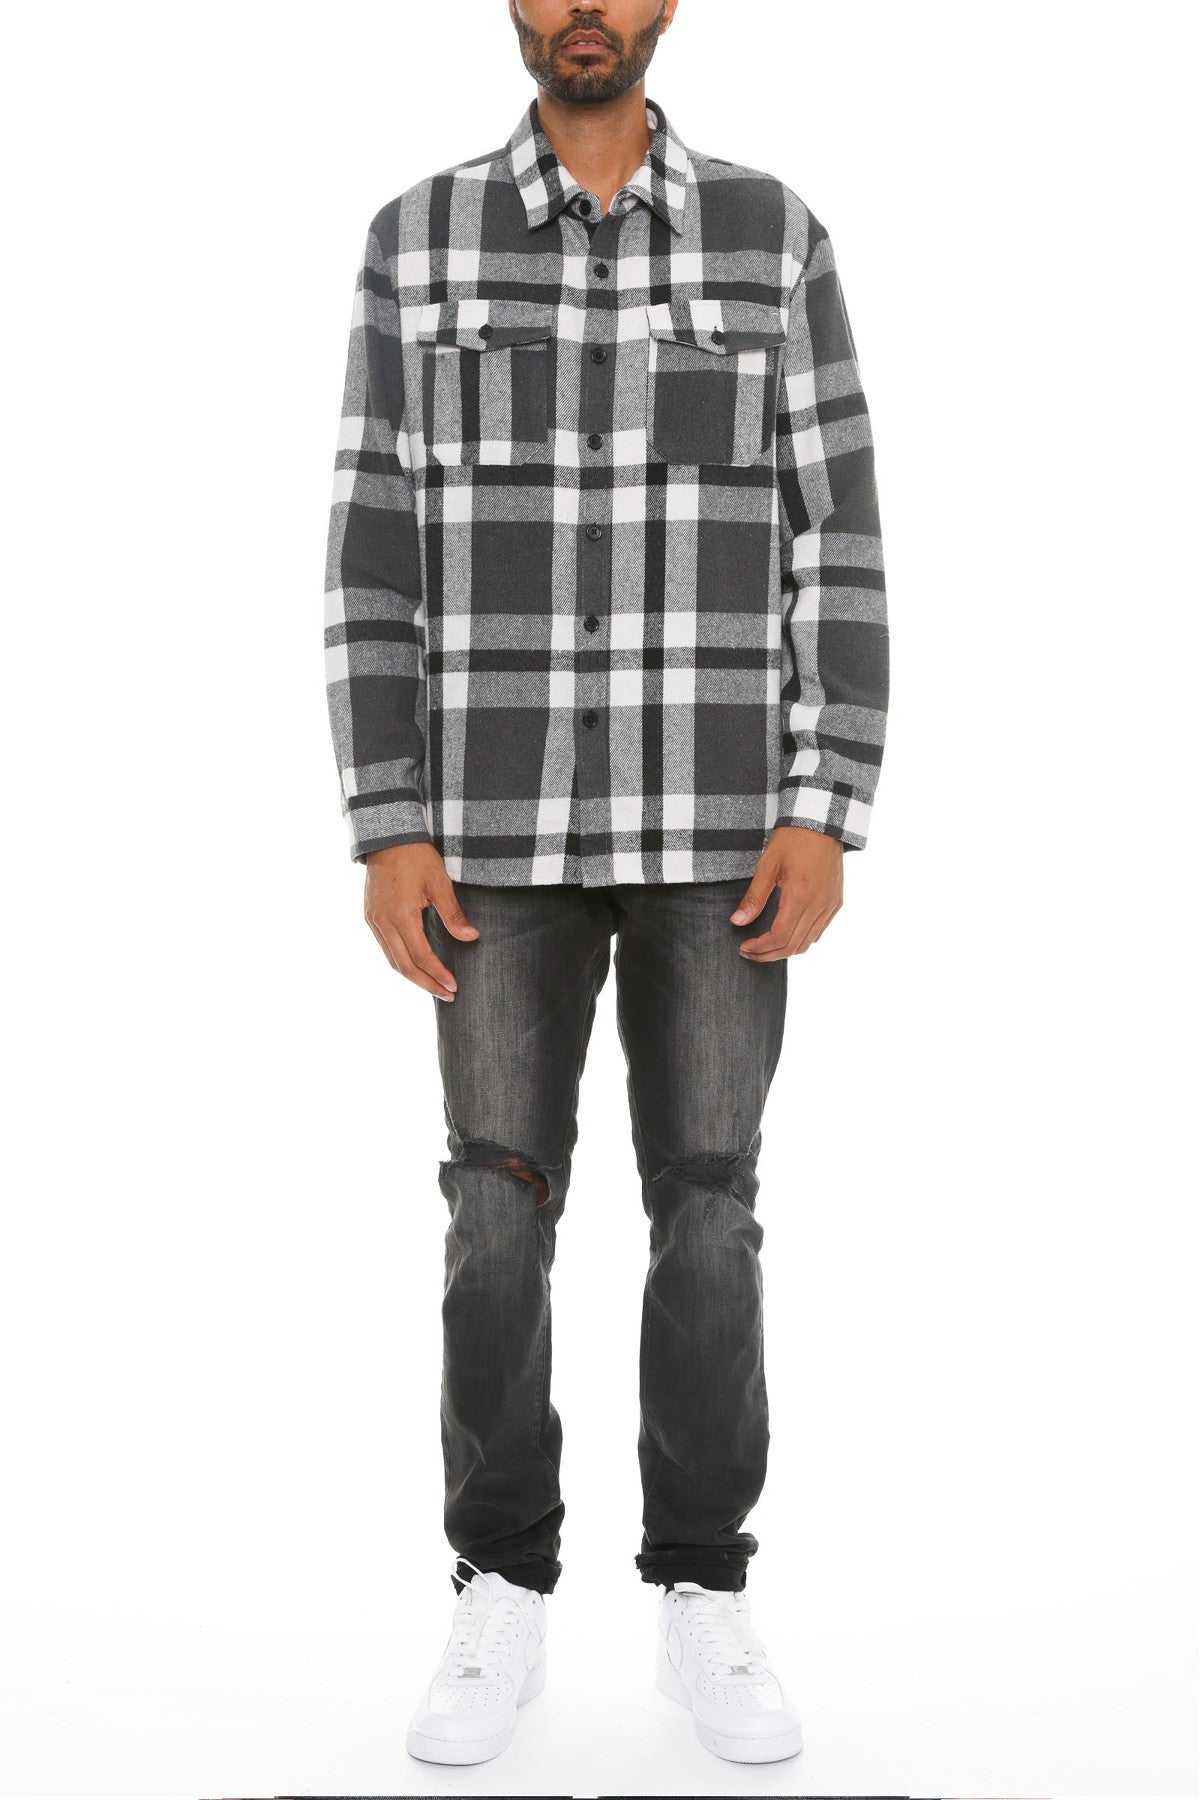 Grey Black - Men's Checkered Soft Flannel Shacket - 8 colors - mens button-up shirt at TFC&H Co.